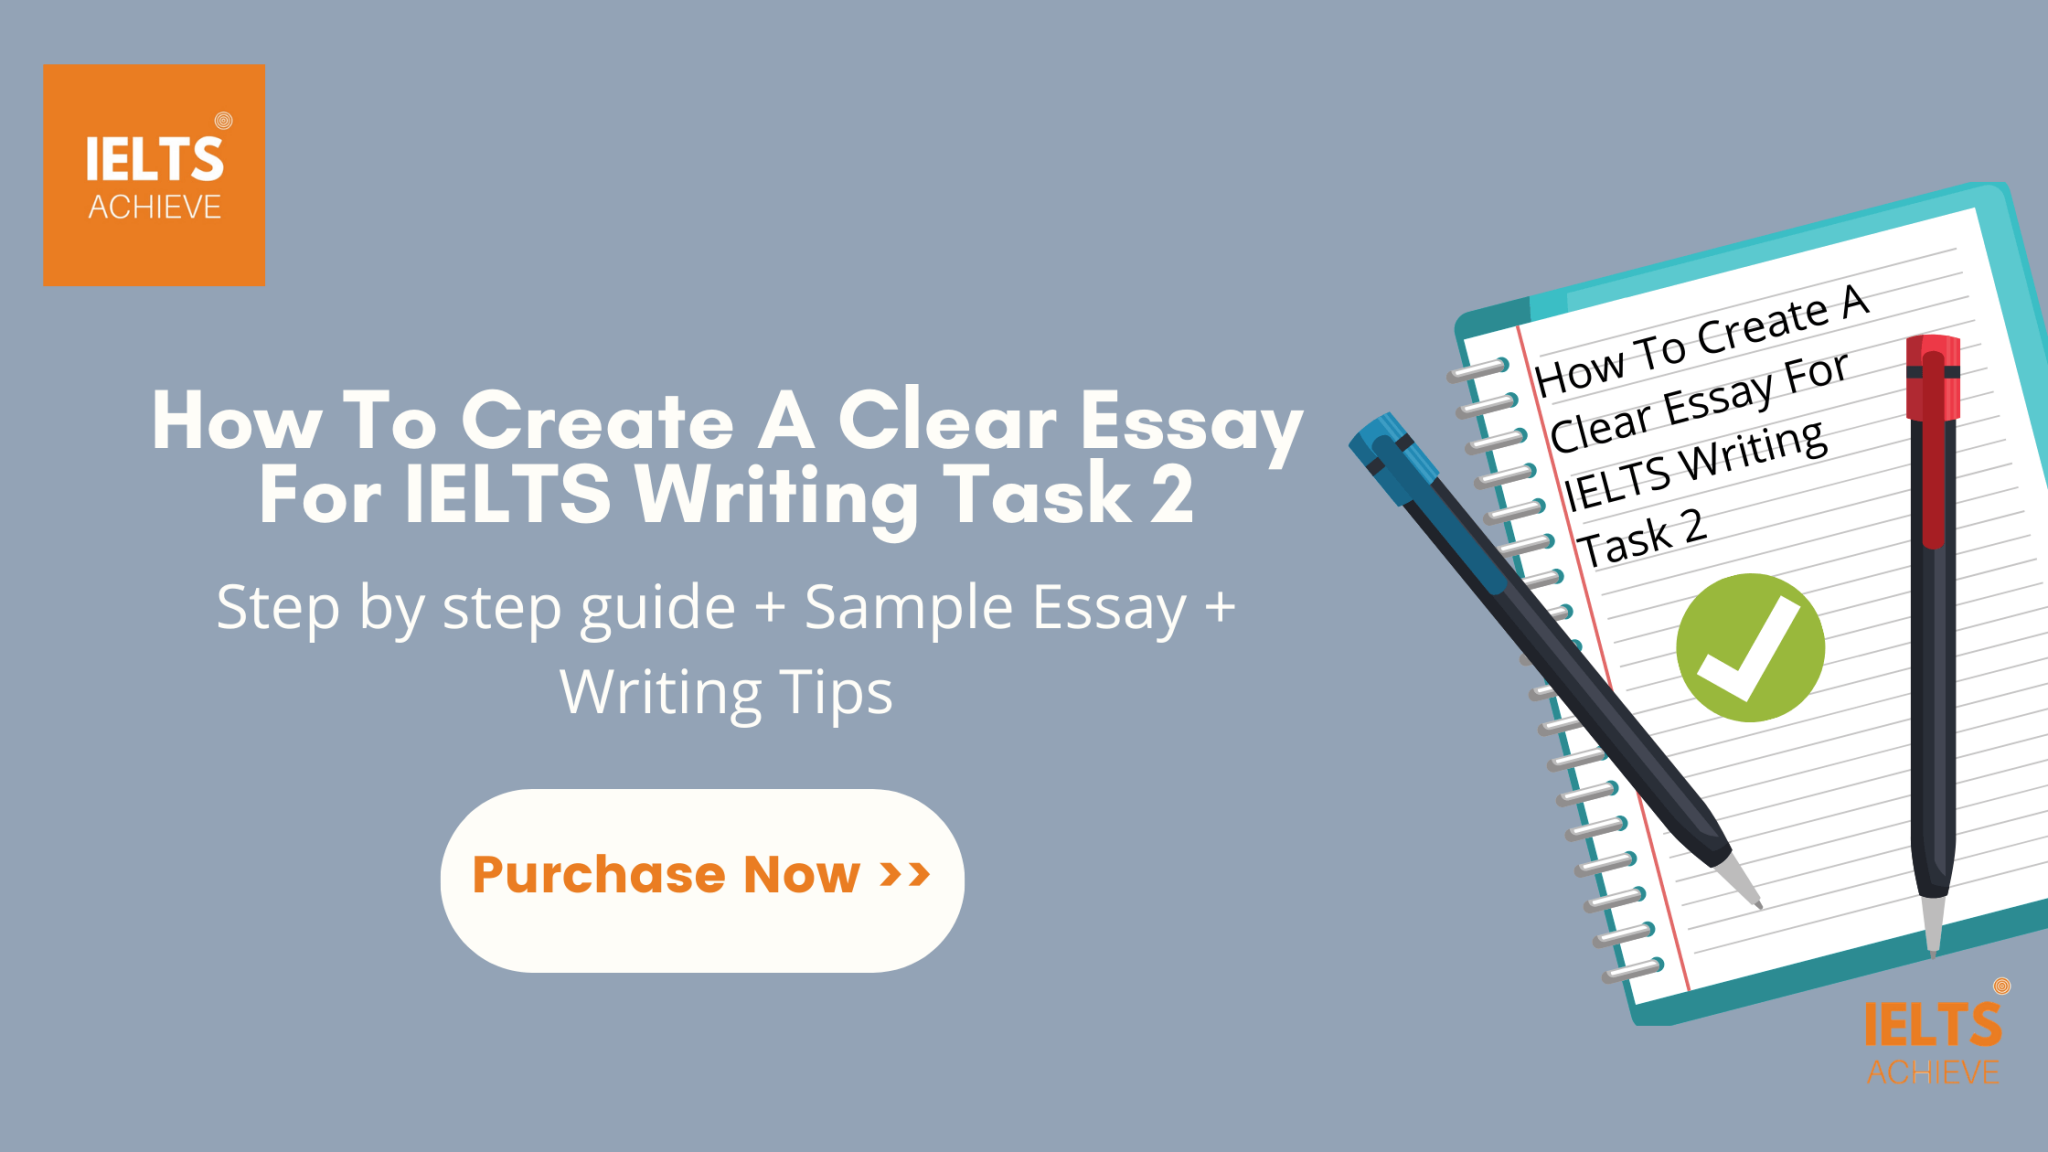 How To Write A Clear Essay?